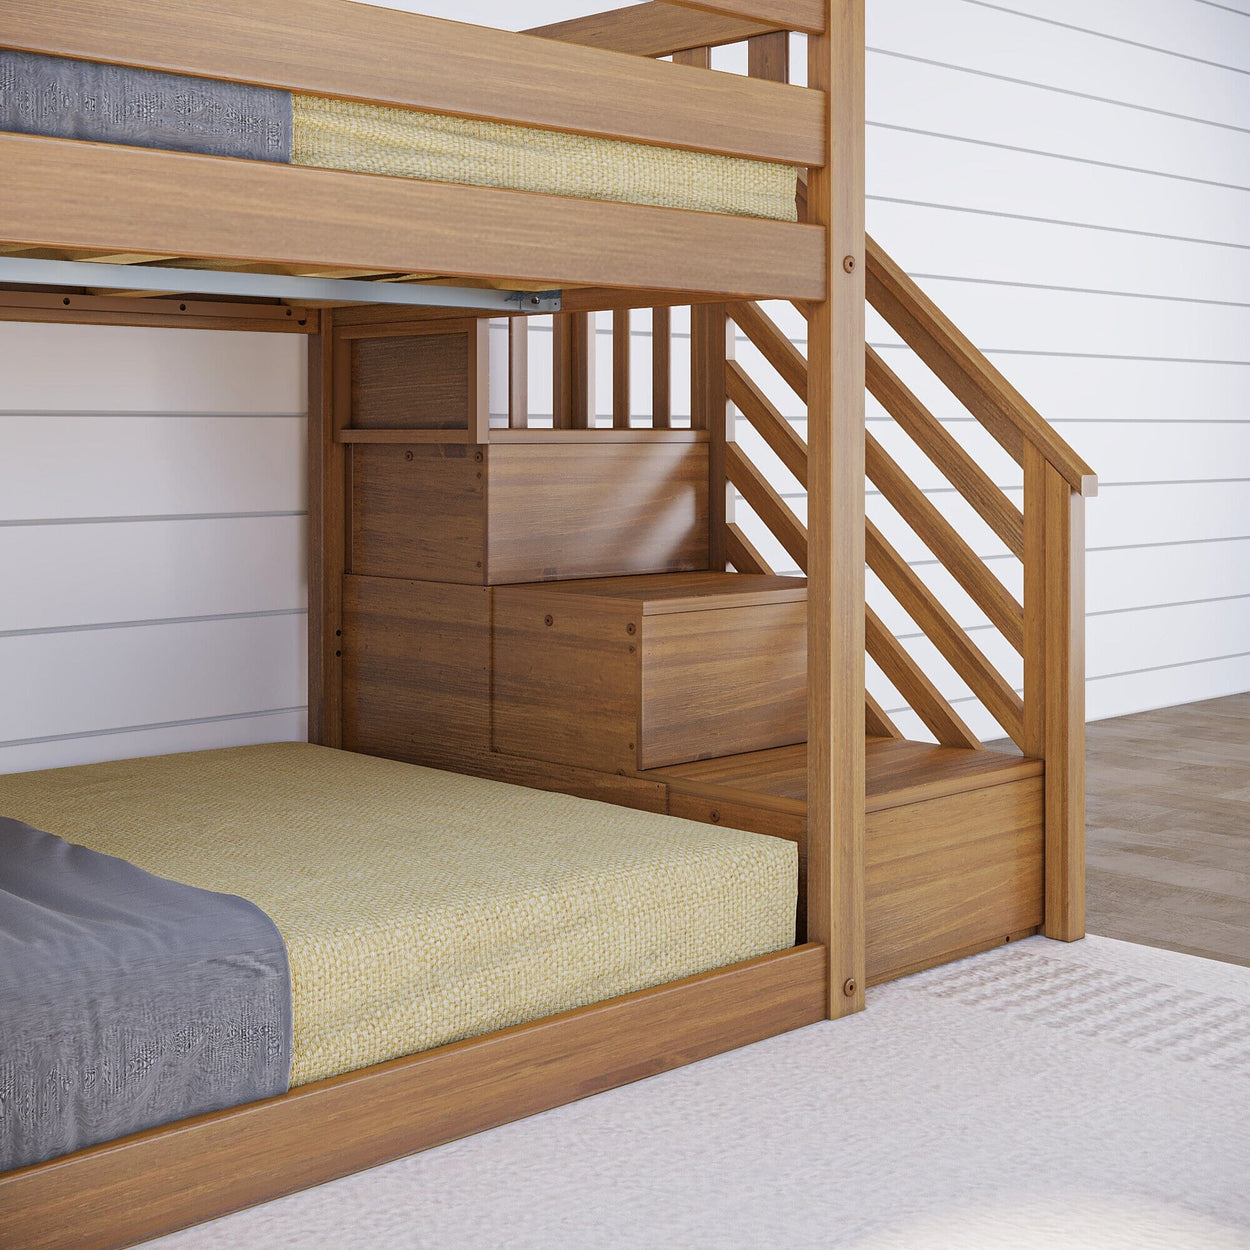 185421-007 : Bunk Beds Classic Low Bunk with Stairs and Easy Slide, Pecan